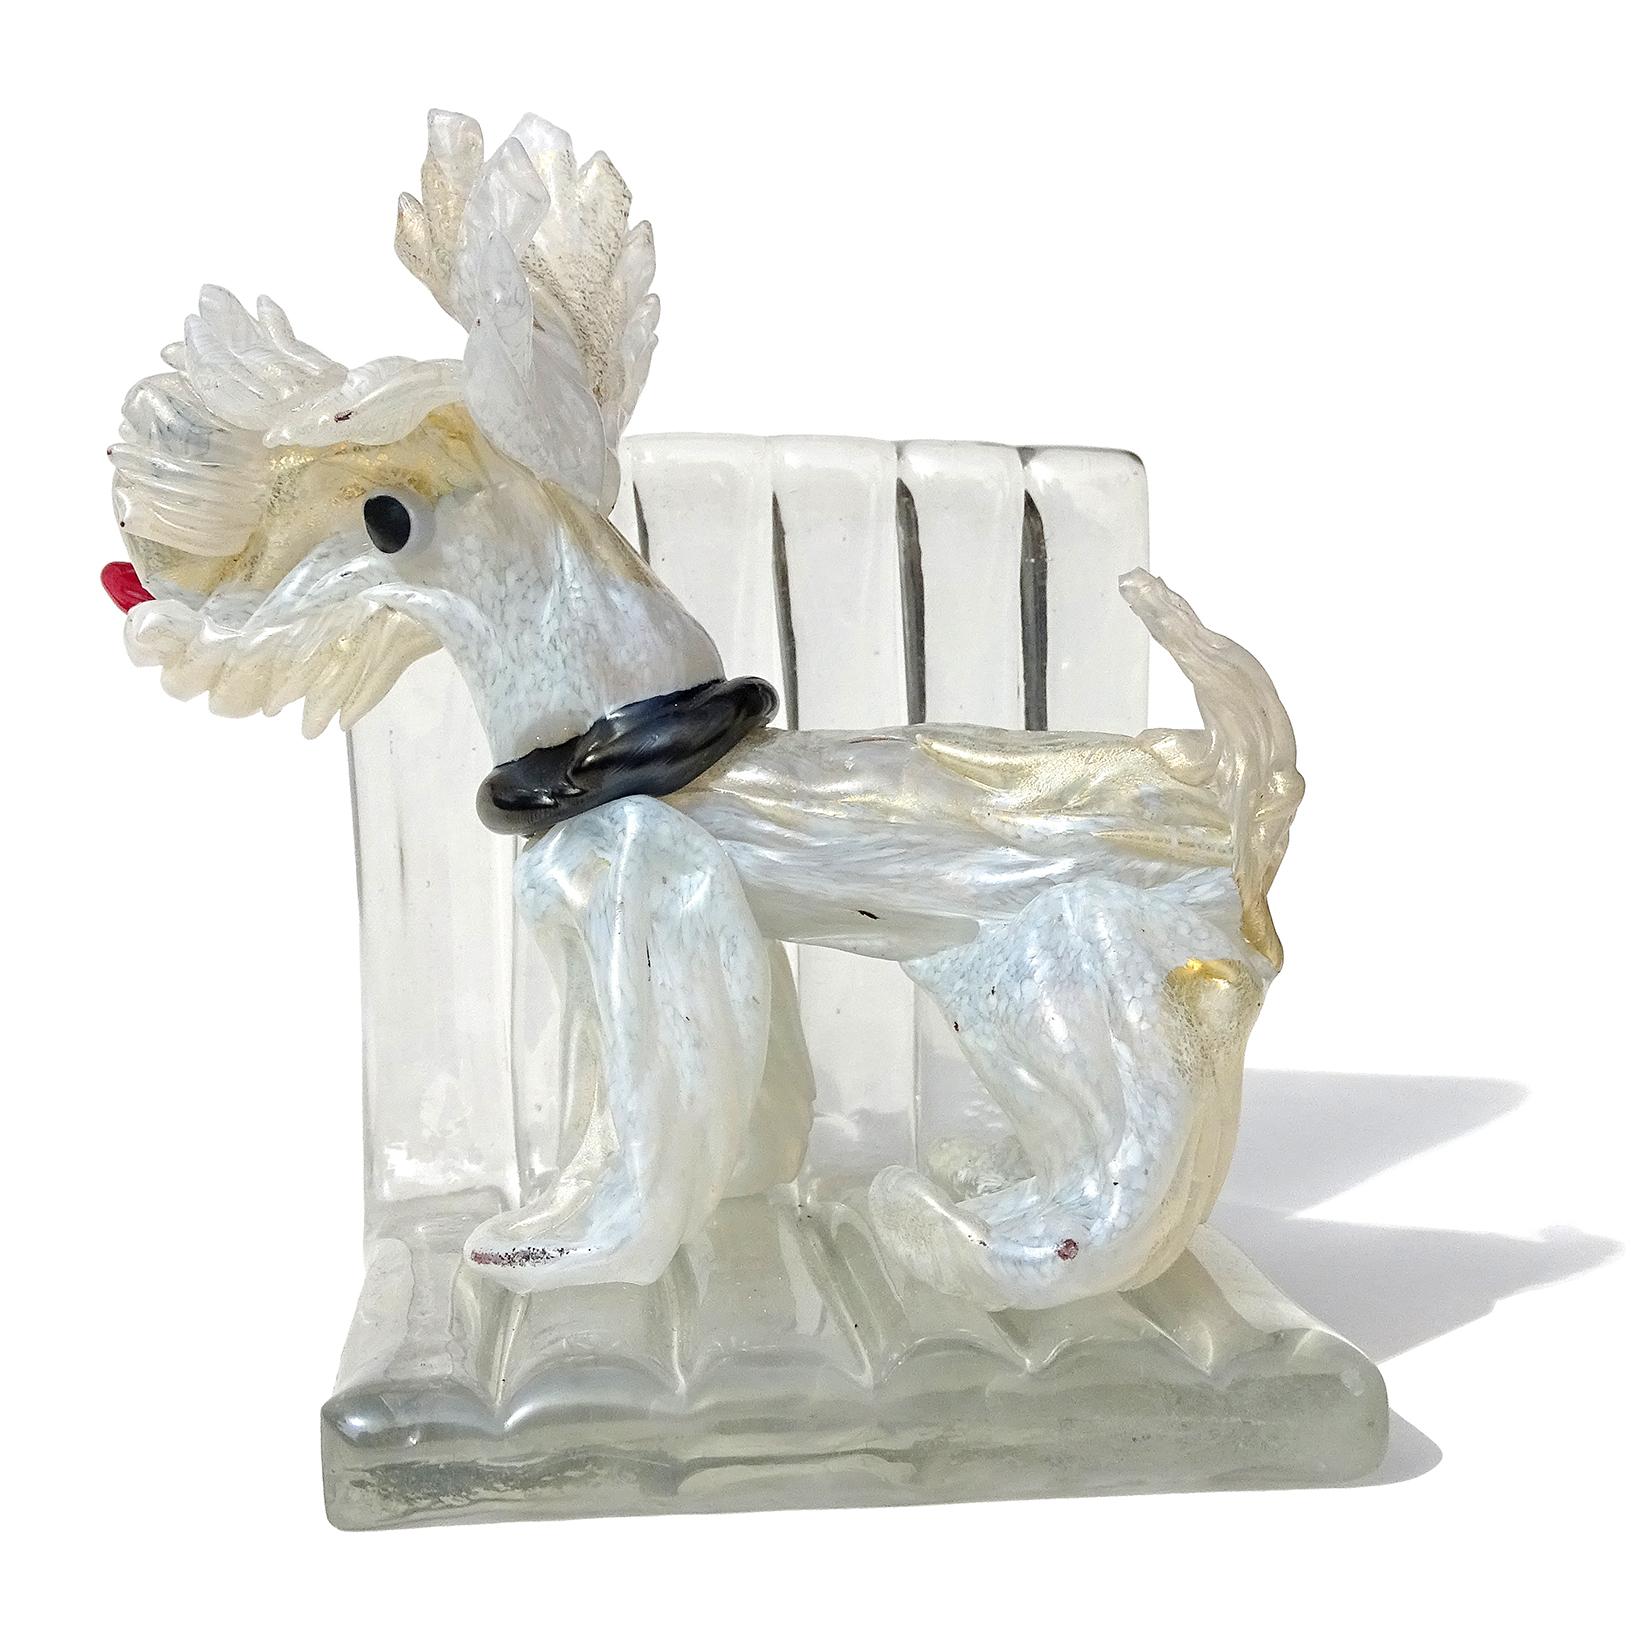 Beautiful early antique Murano hand blown white and gold flecks Italian art glass scotty dog bookend sculpture. The dog is very well sculpted, with lots of details to create the fur all over. It has a black collar, nose and eyes, with bright red